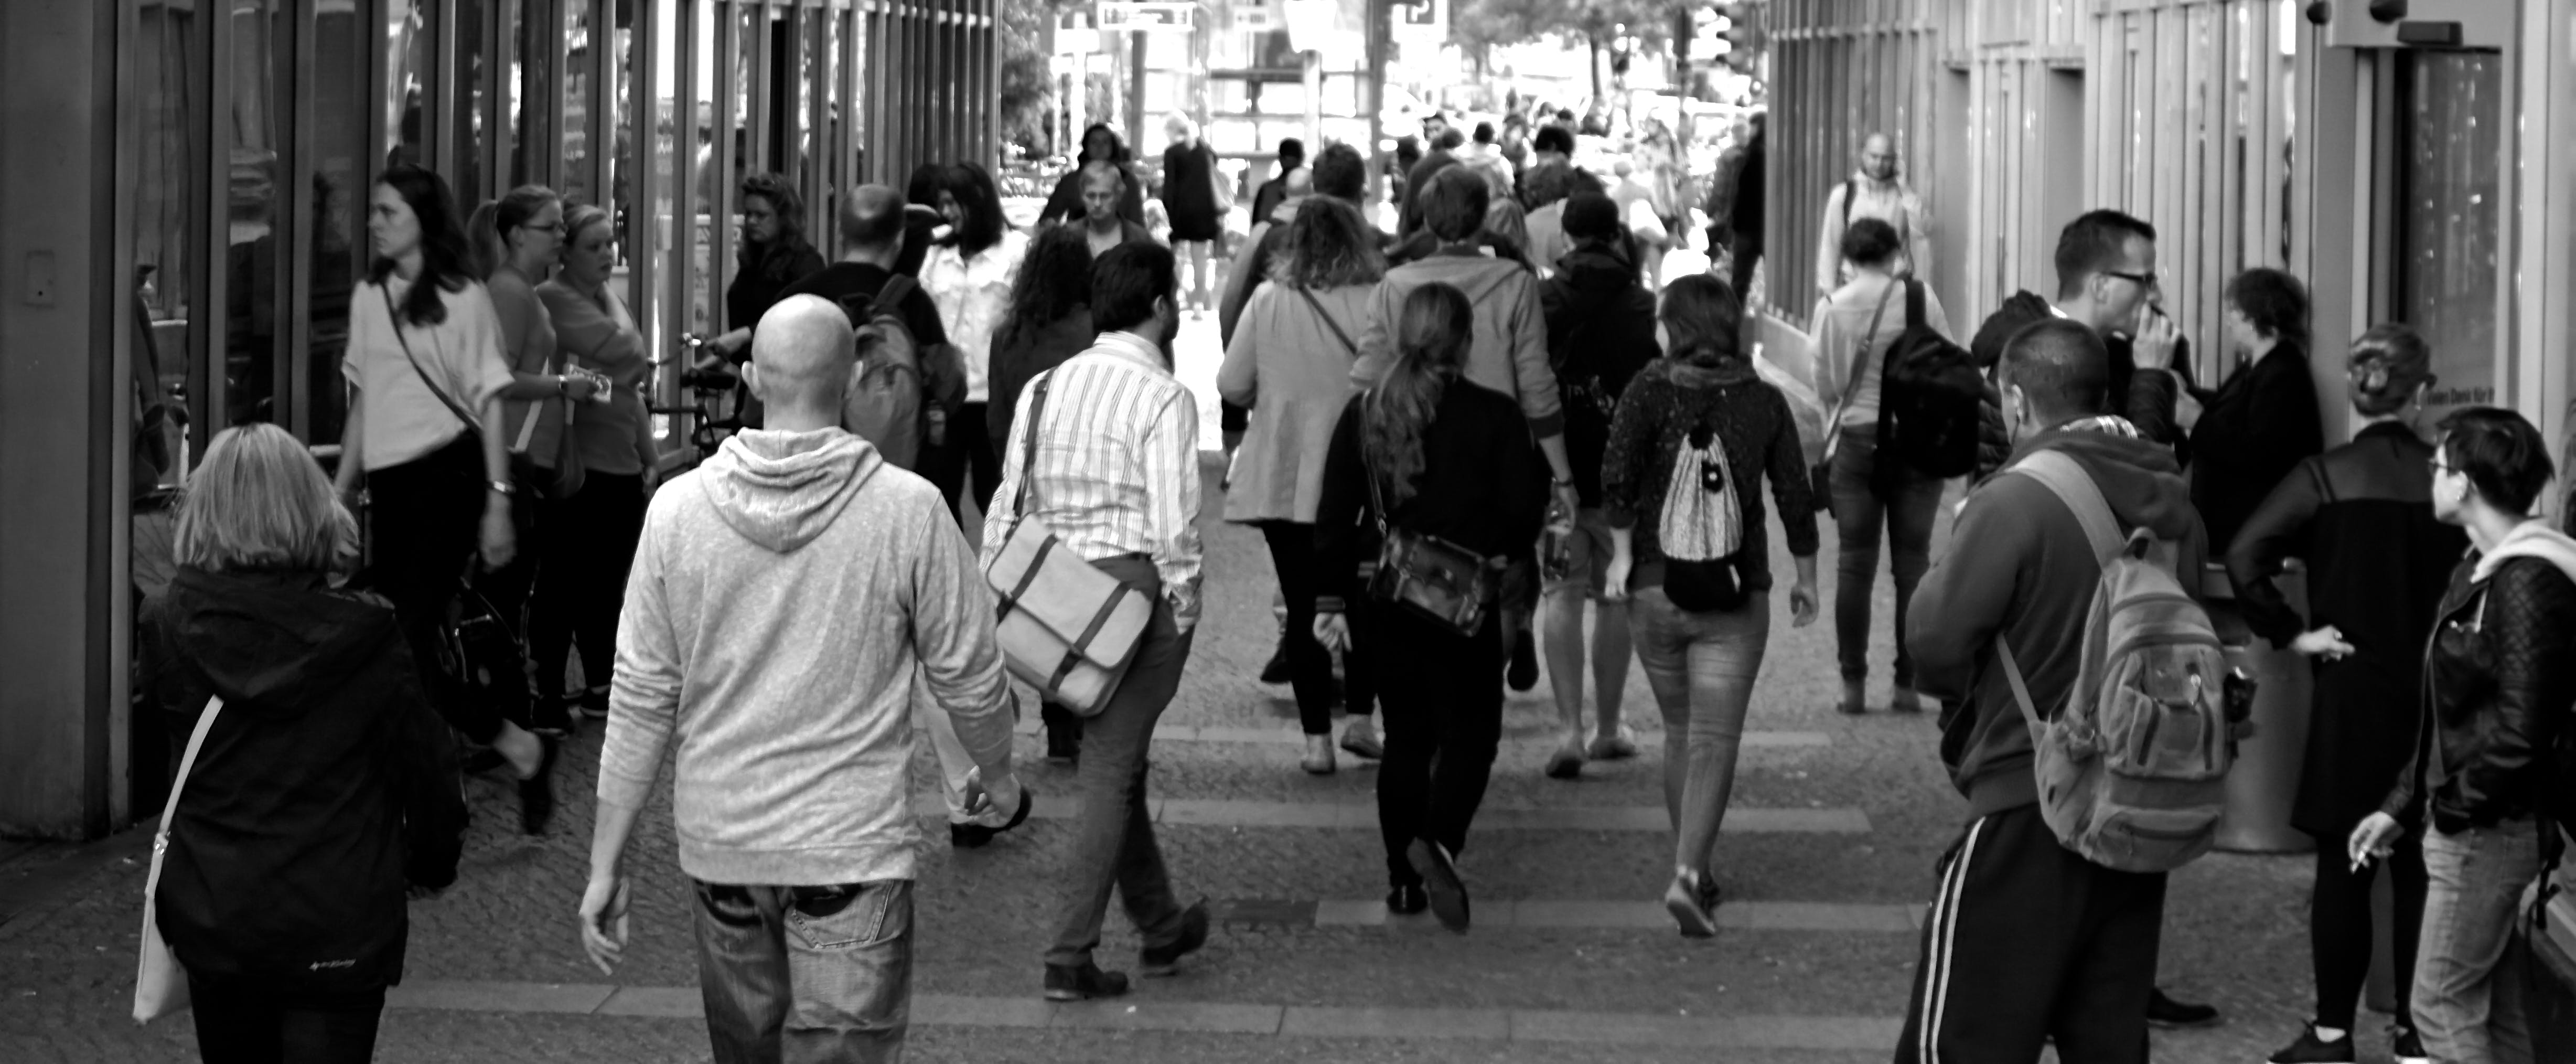 Black and white photo of people walking down a busy street in a city.